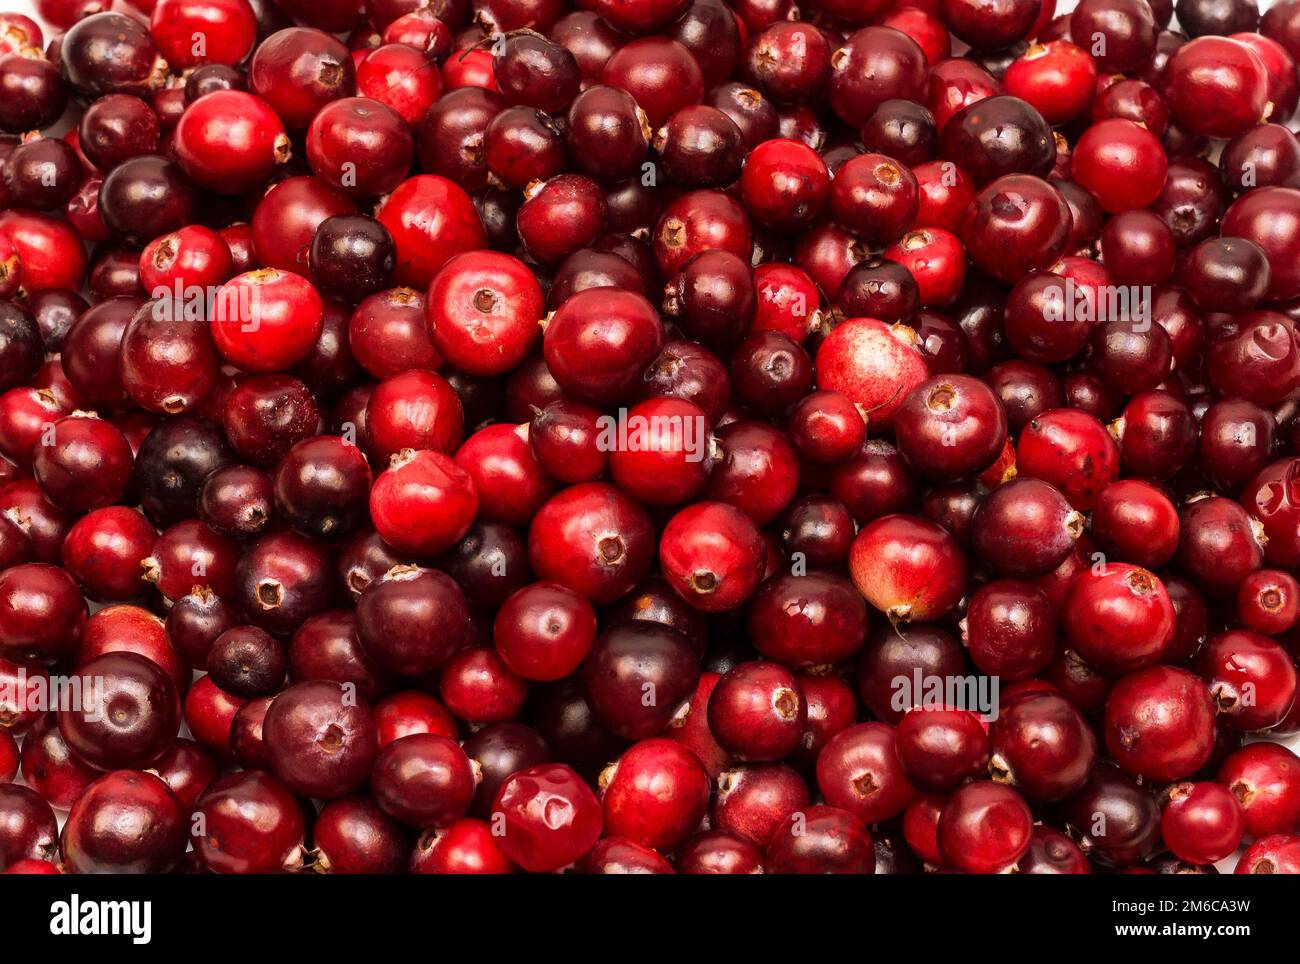 Ripe red berries of cranberries in large quantities Stock Photo